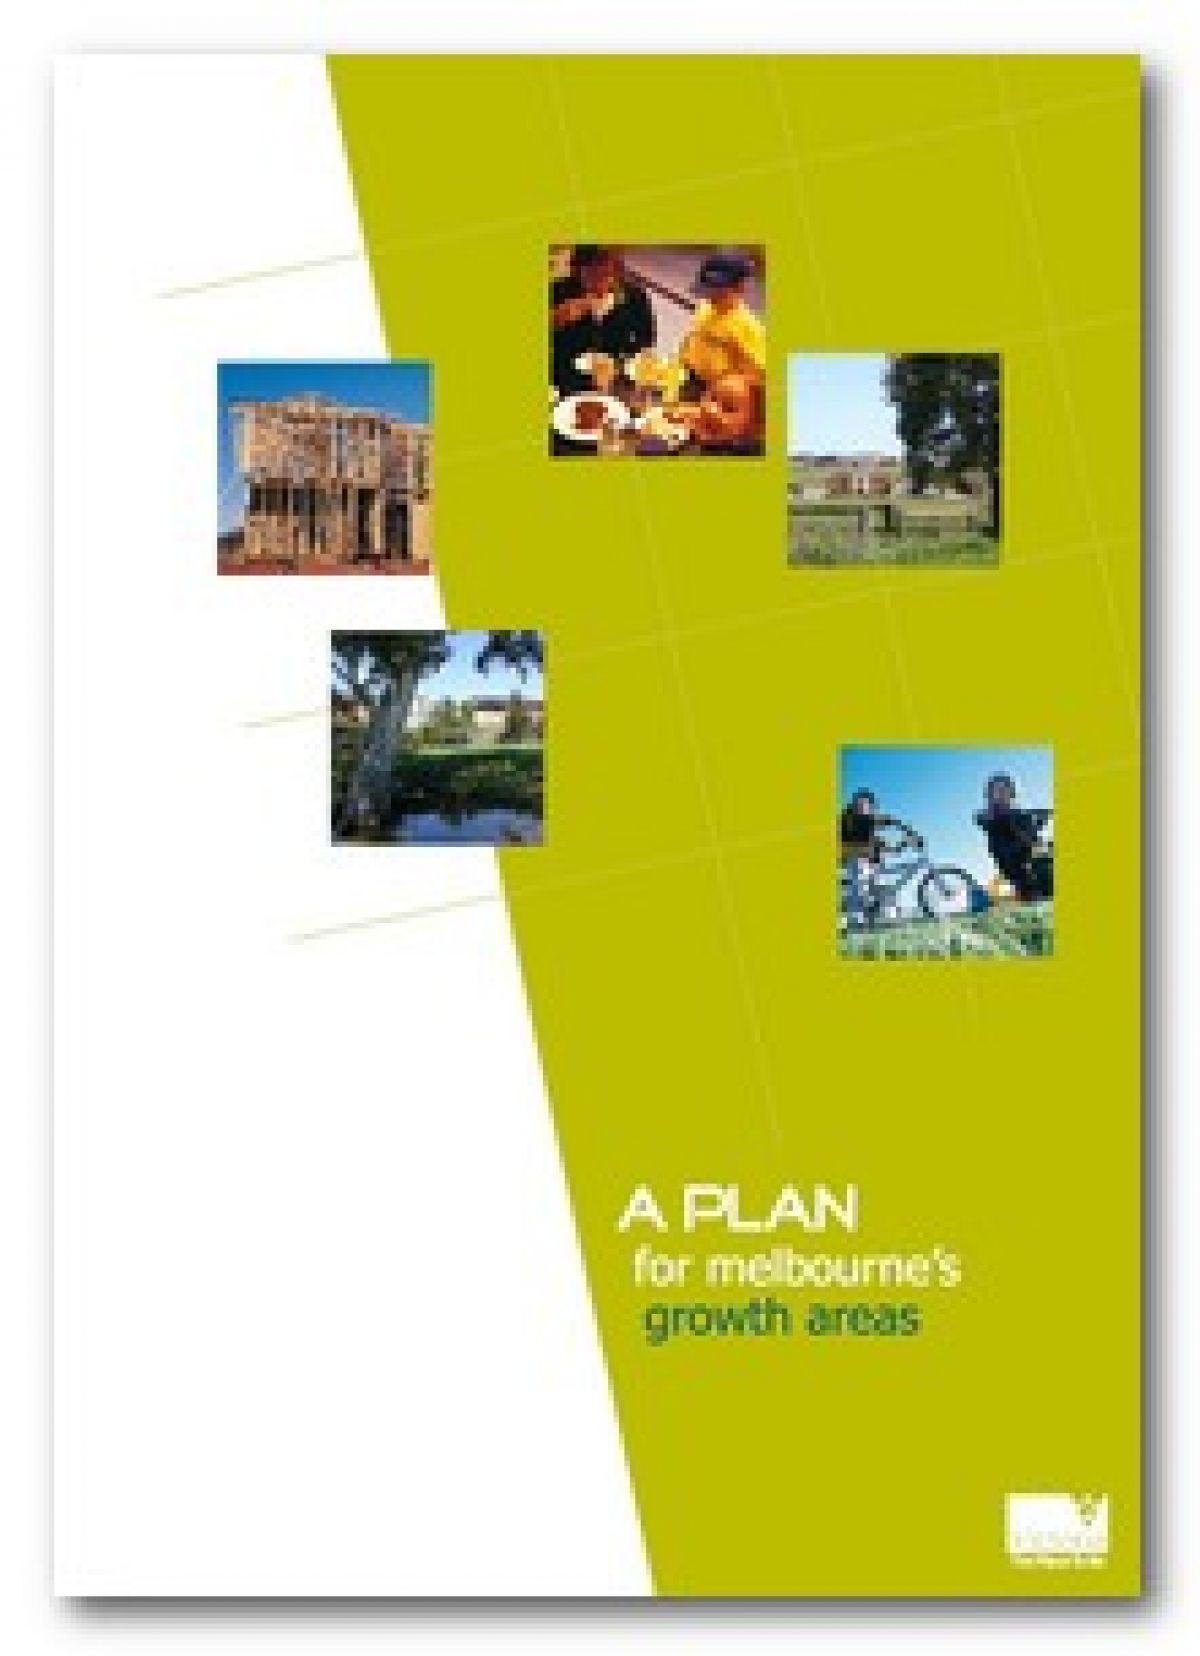 A plan for Melbournes growth areas cover